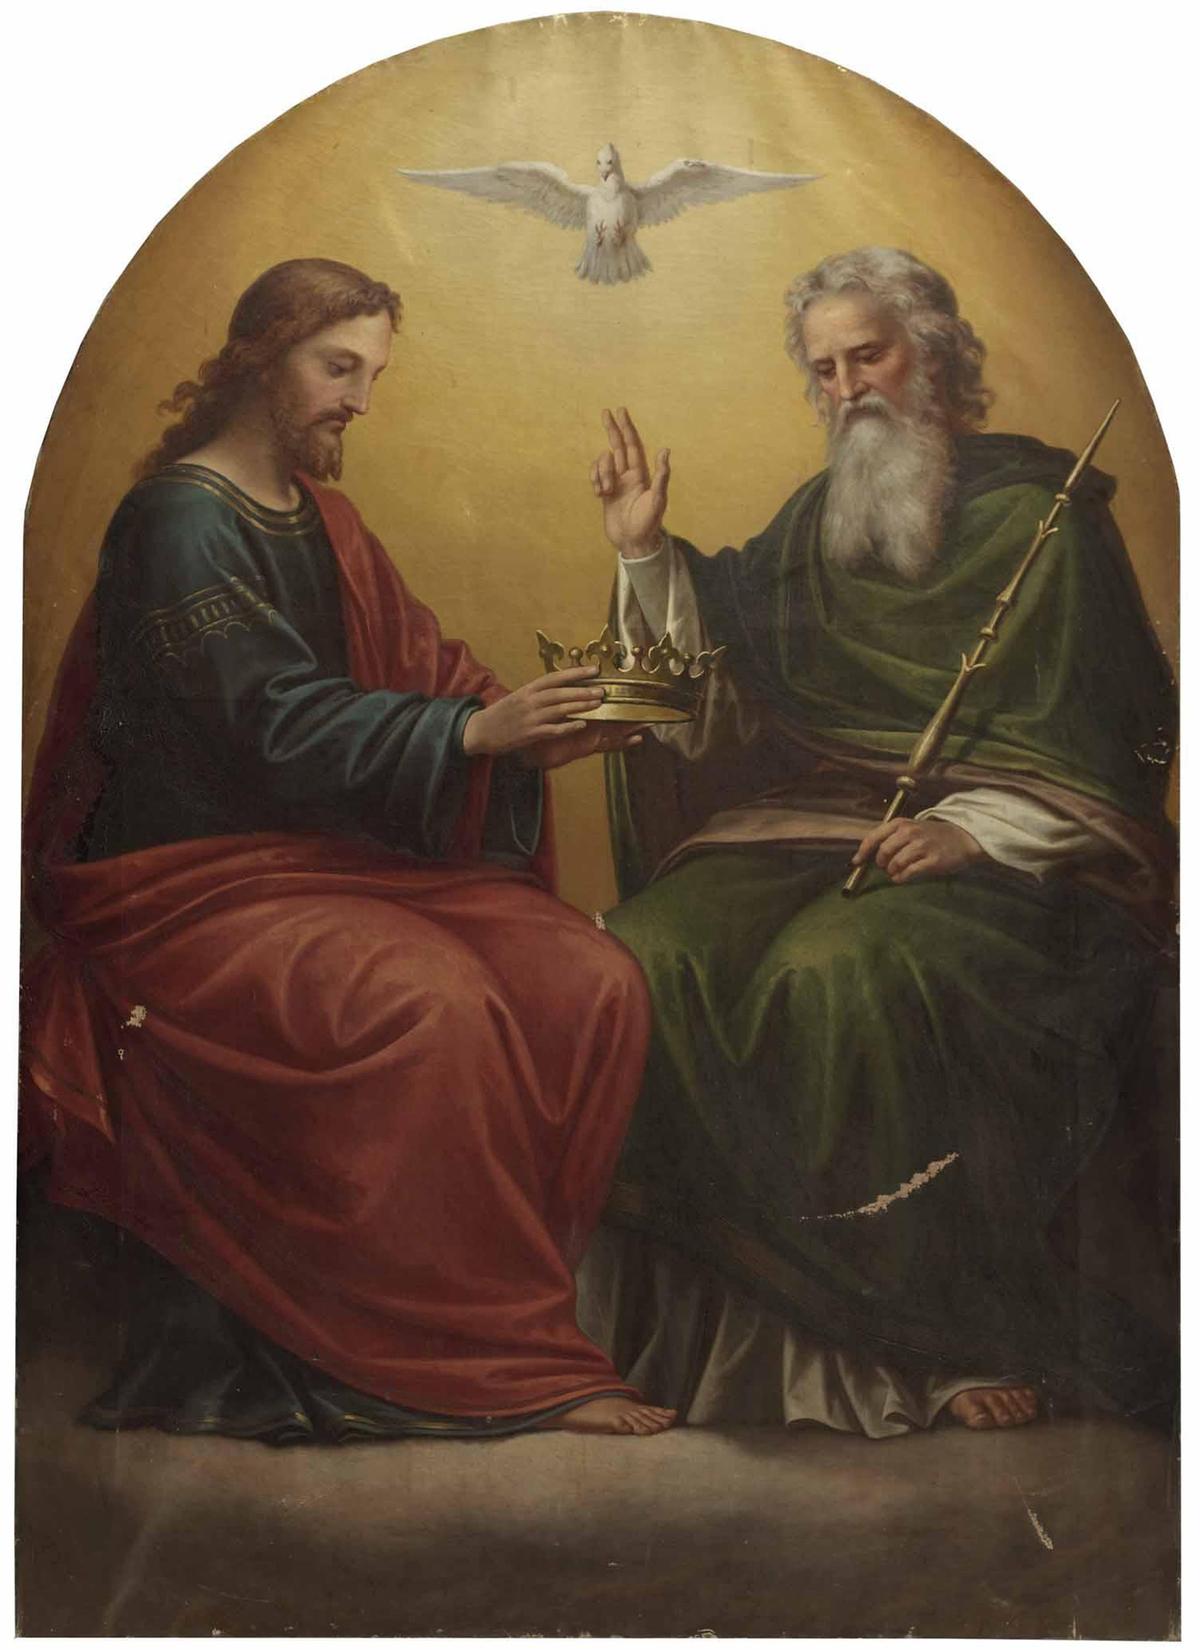 A painting of the Holy Trinity: God the Father, God the Son, and the Holy Spirit, before 1917, by Max Fürst. (Public Domain)